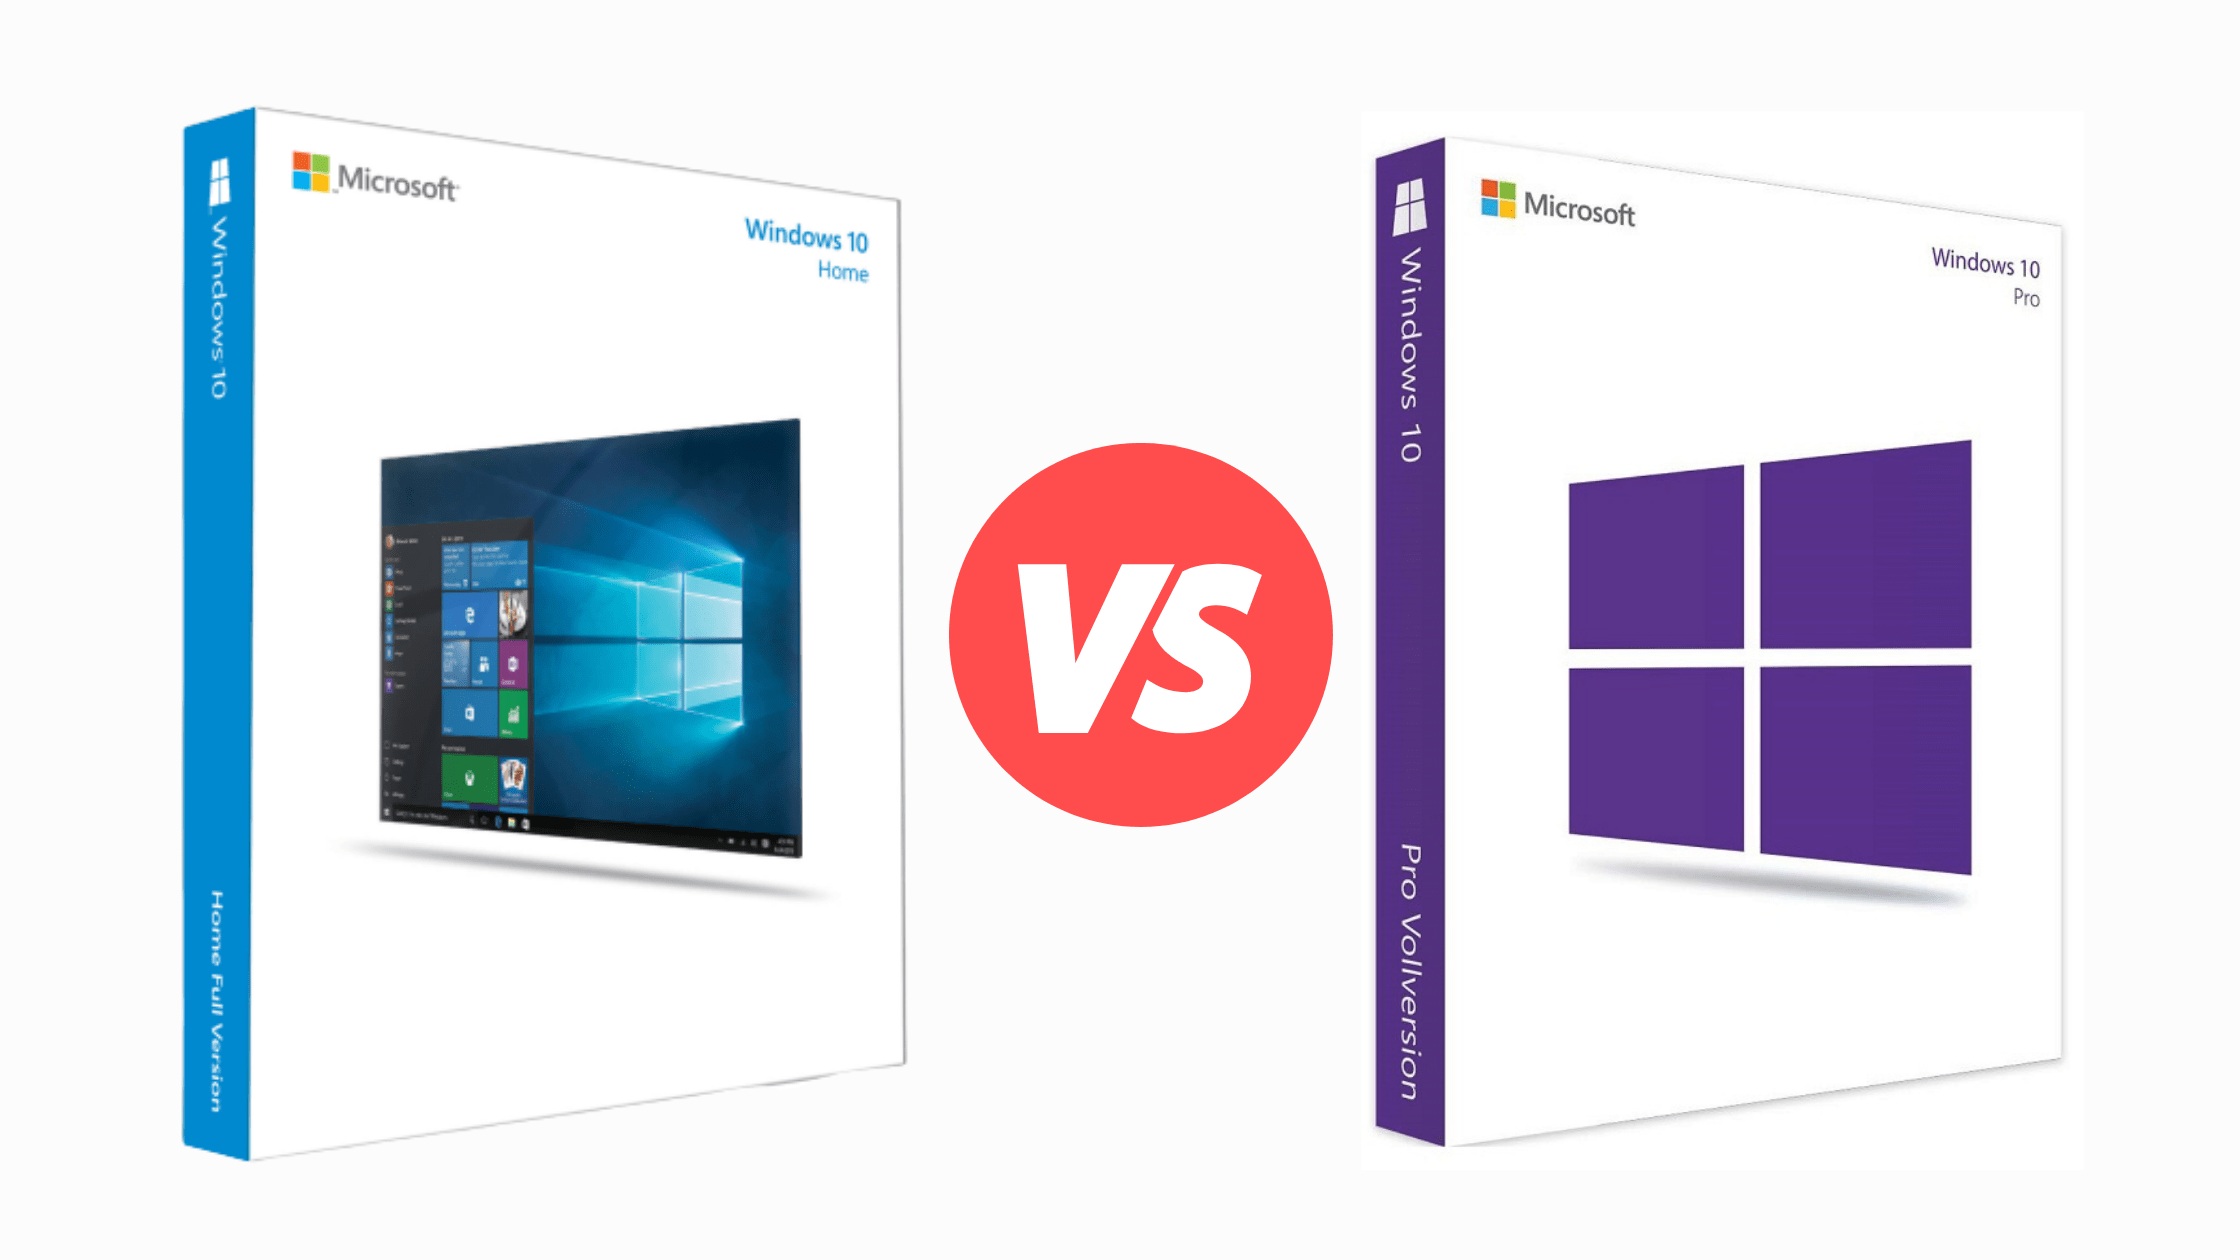 Windows 10 Home vs. Pro Edition: The Differences